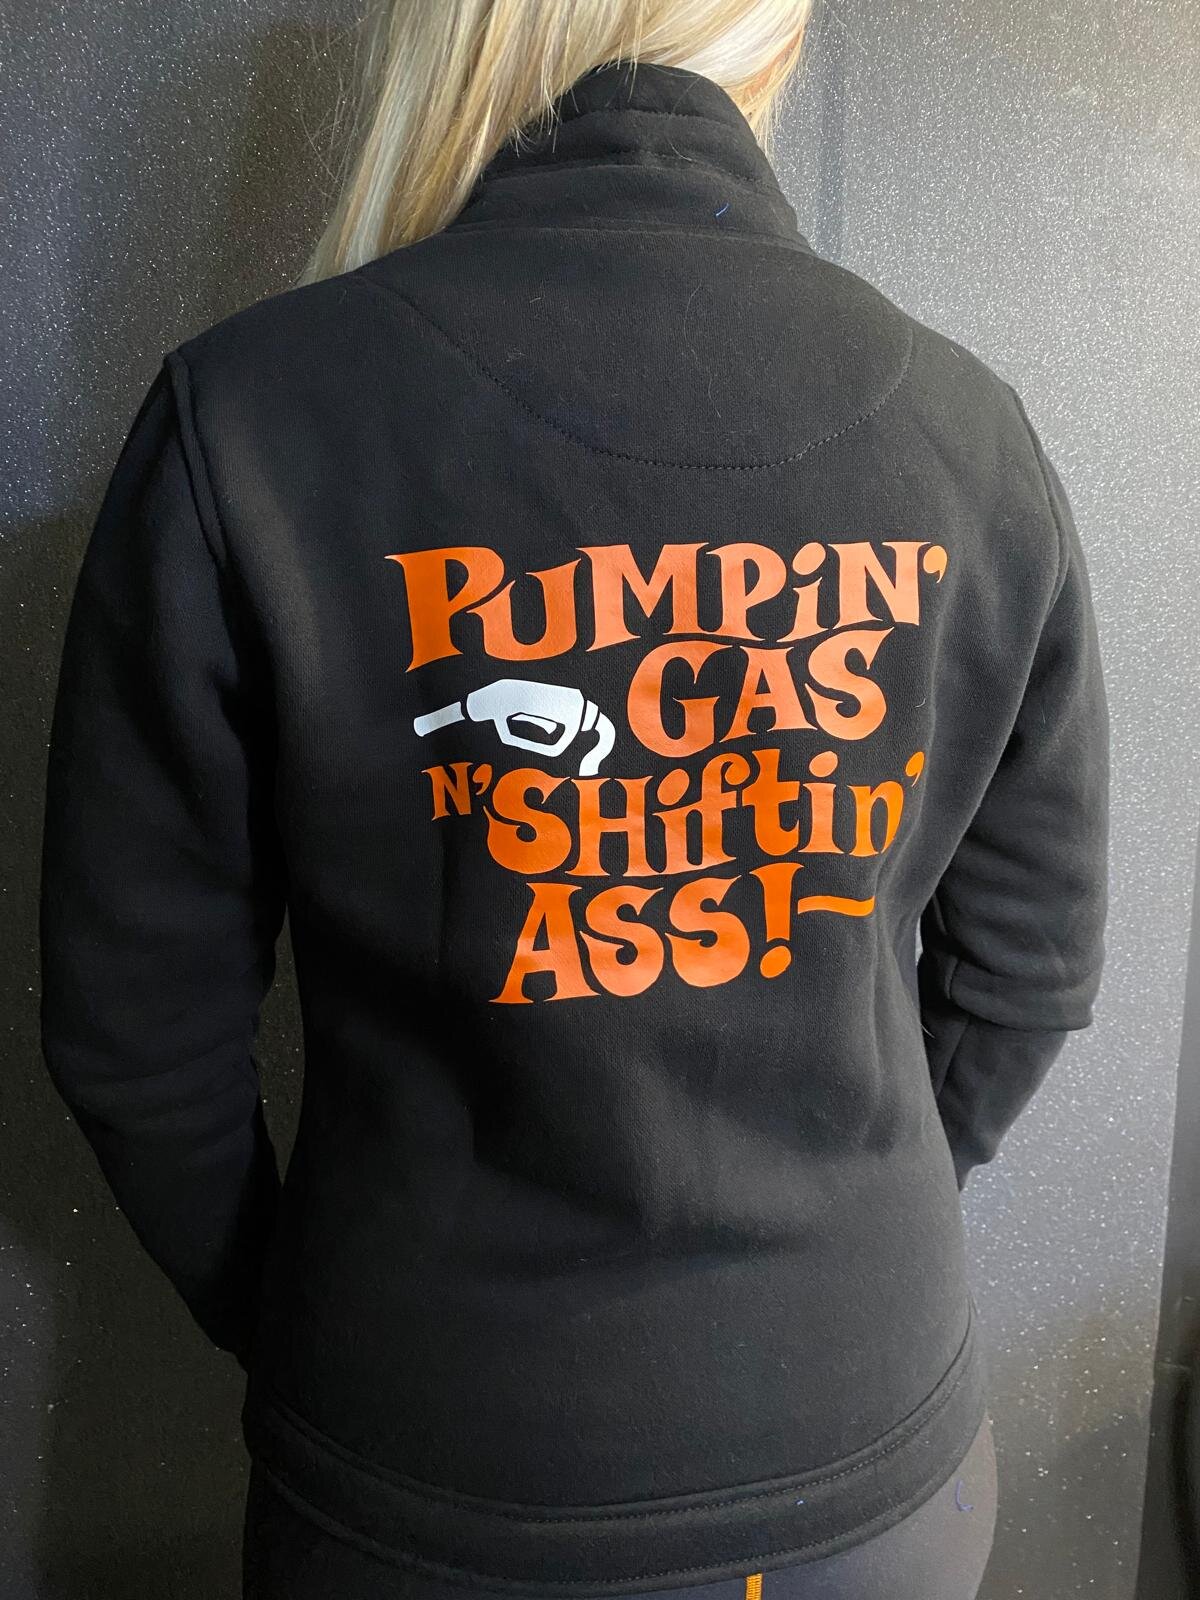 A woman wearing black lady sweatshirt with orange &quot;pumping gas shifting ass&quot;motive on the back